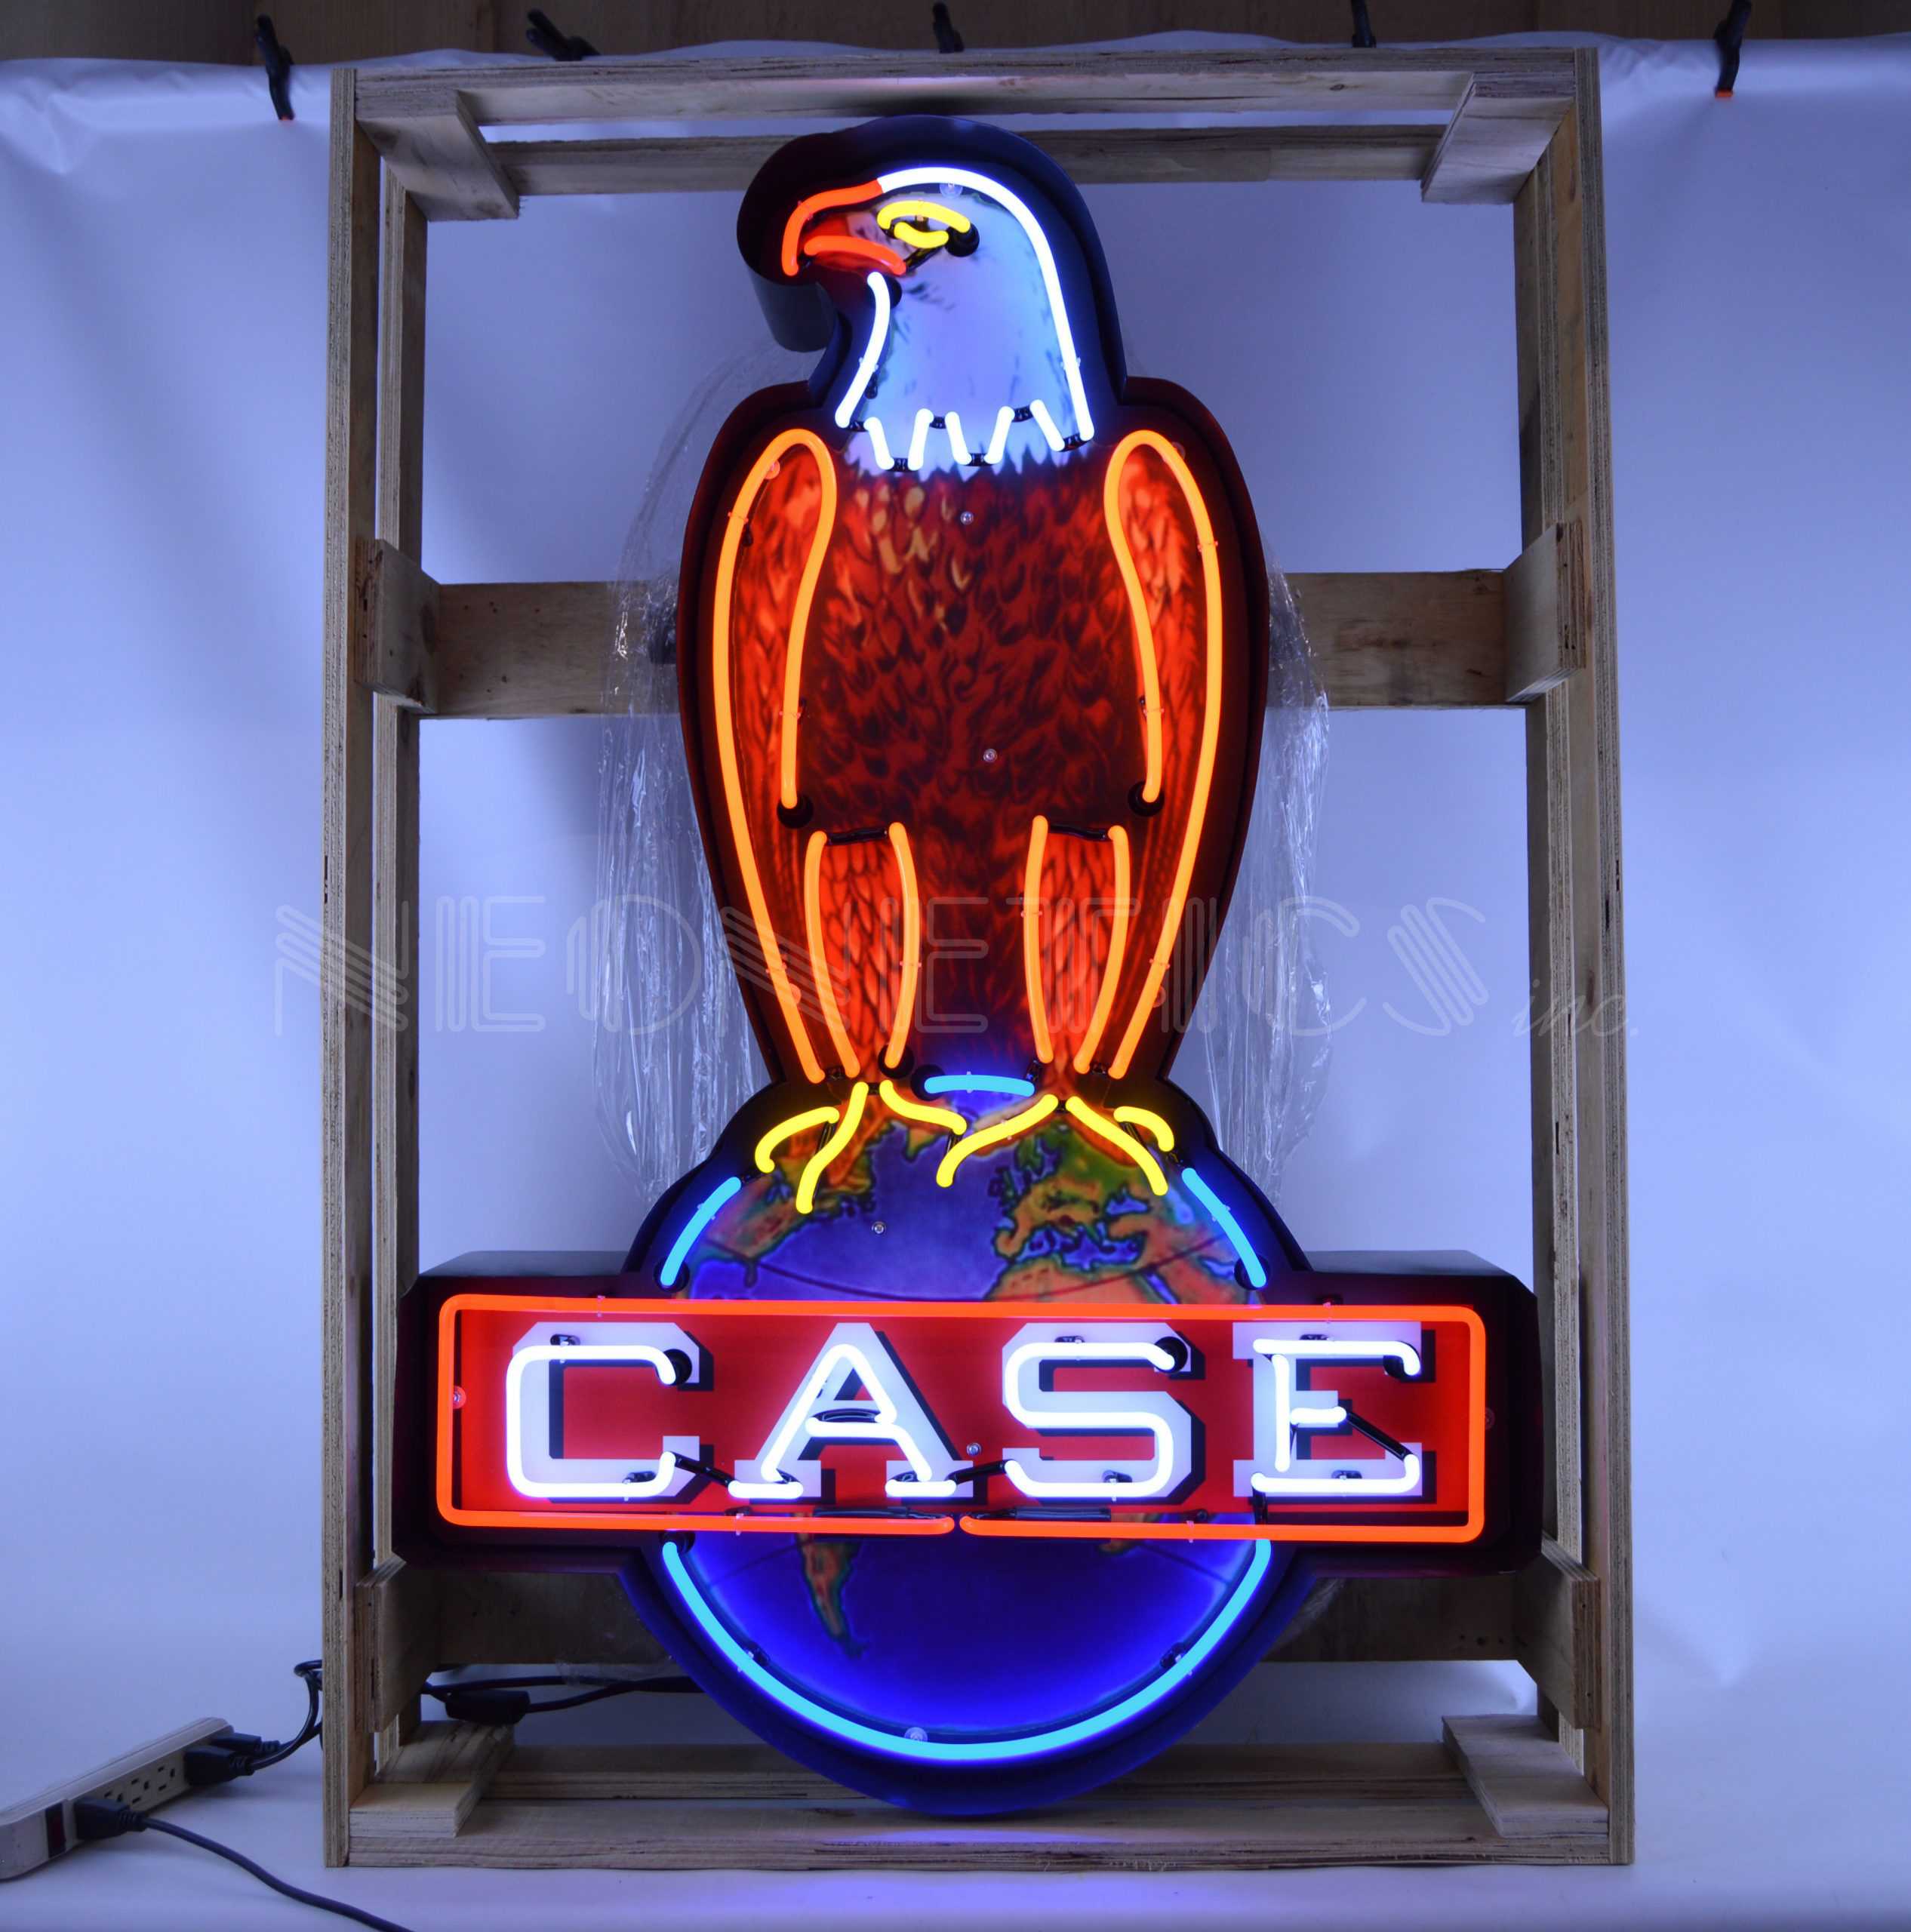 CASE EAGLE NEON SIGN IN SHAPED STEEL CAN